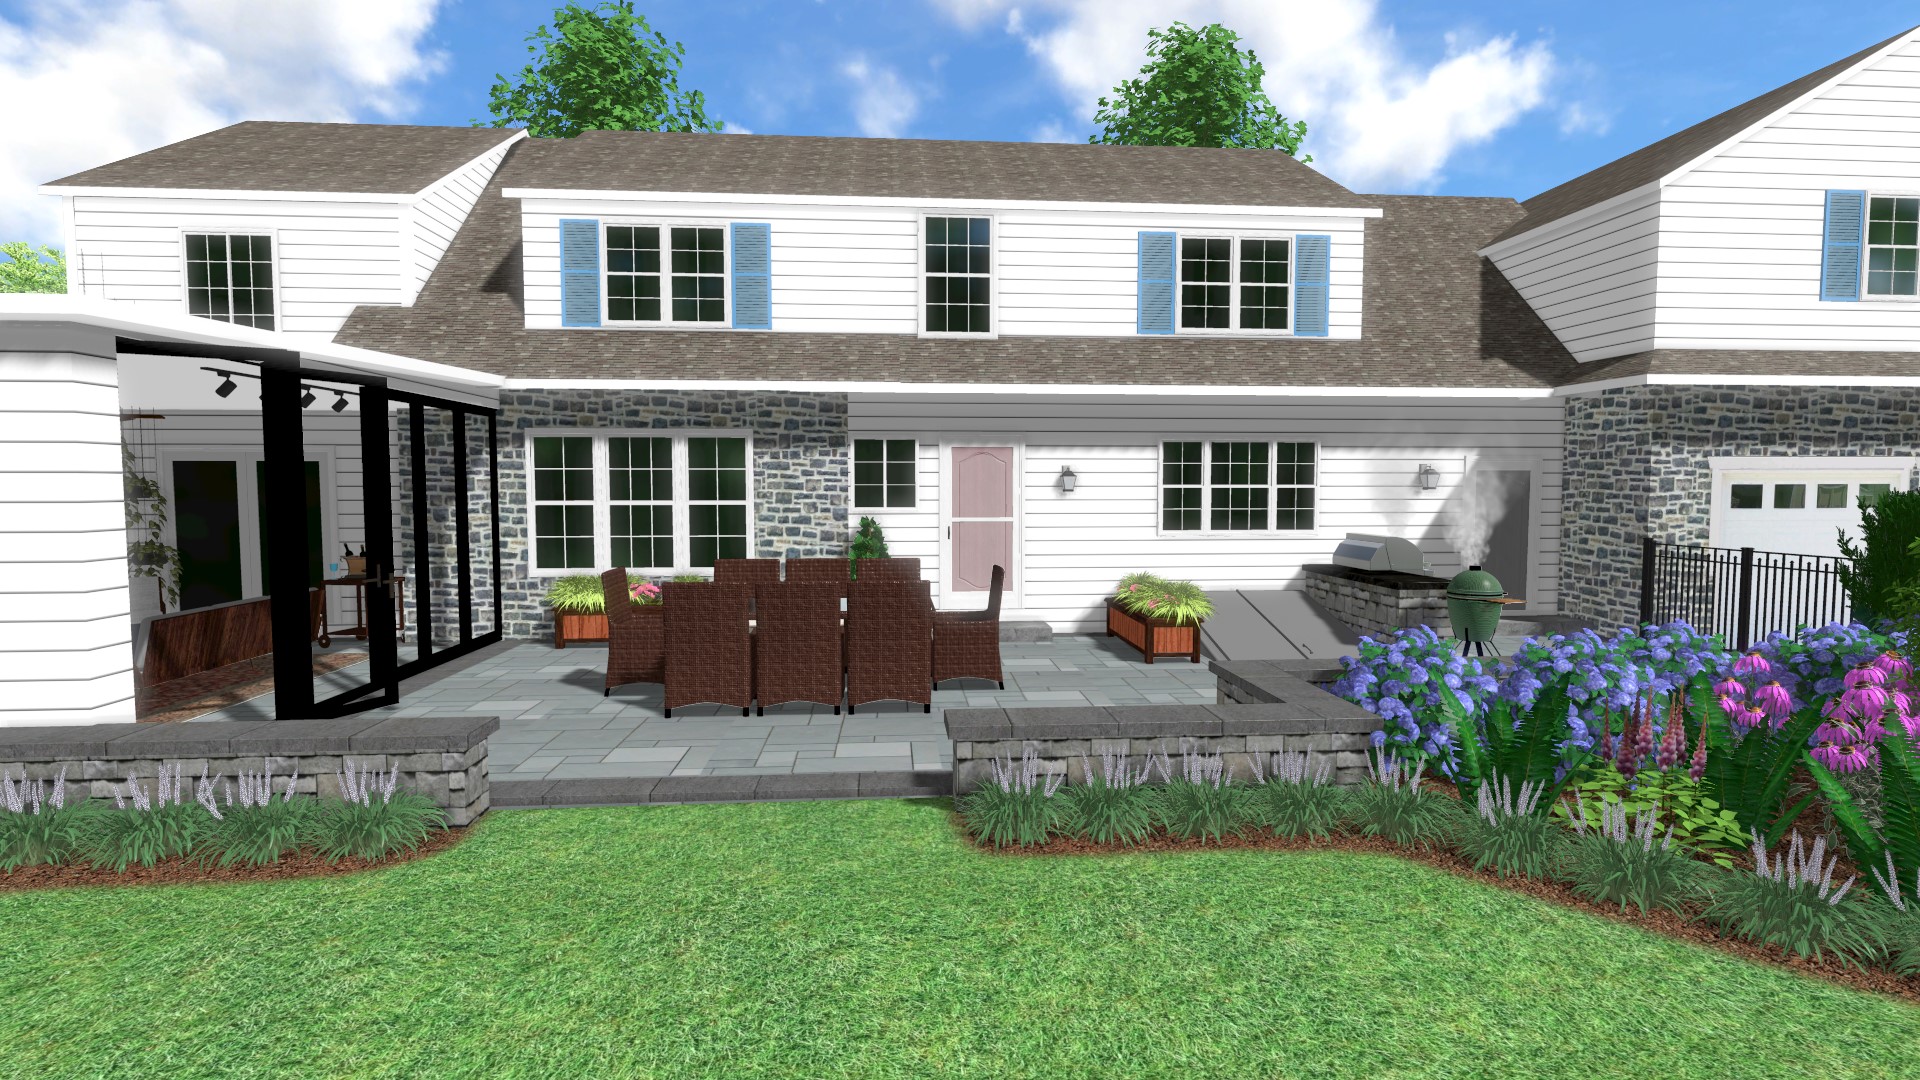 Full Estate Design and Planning in Malvern PA